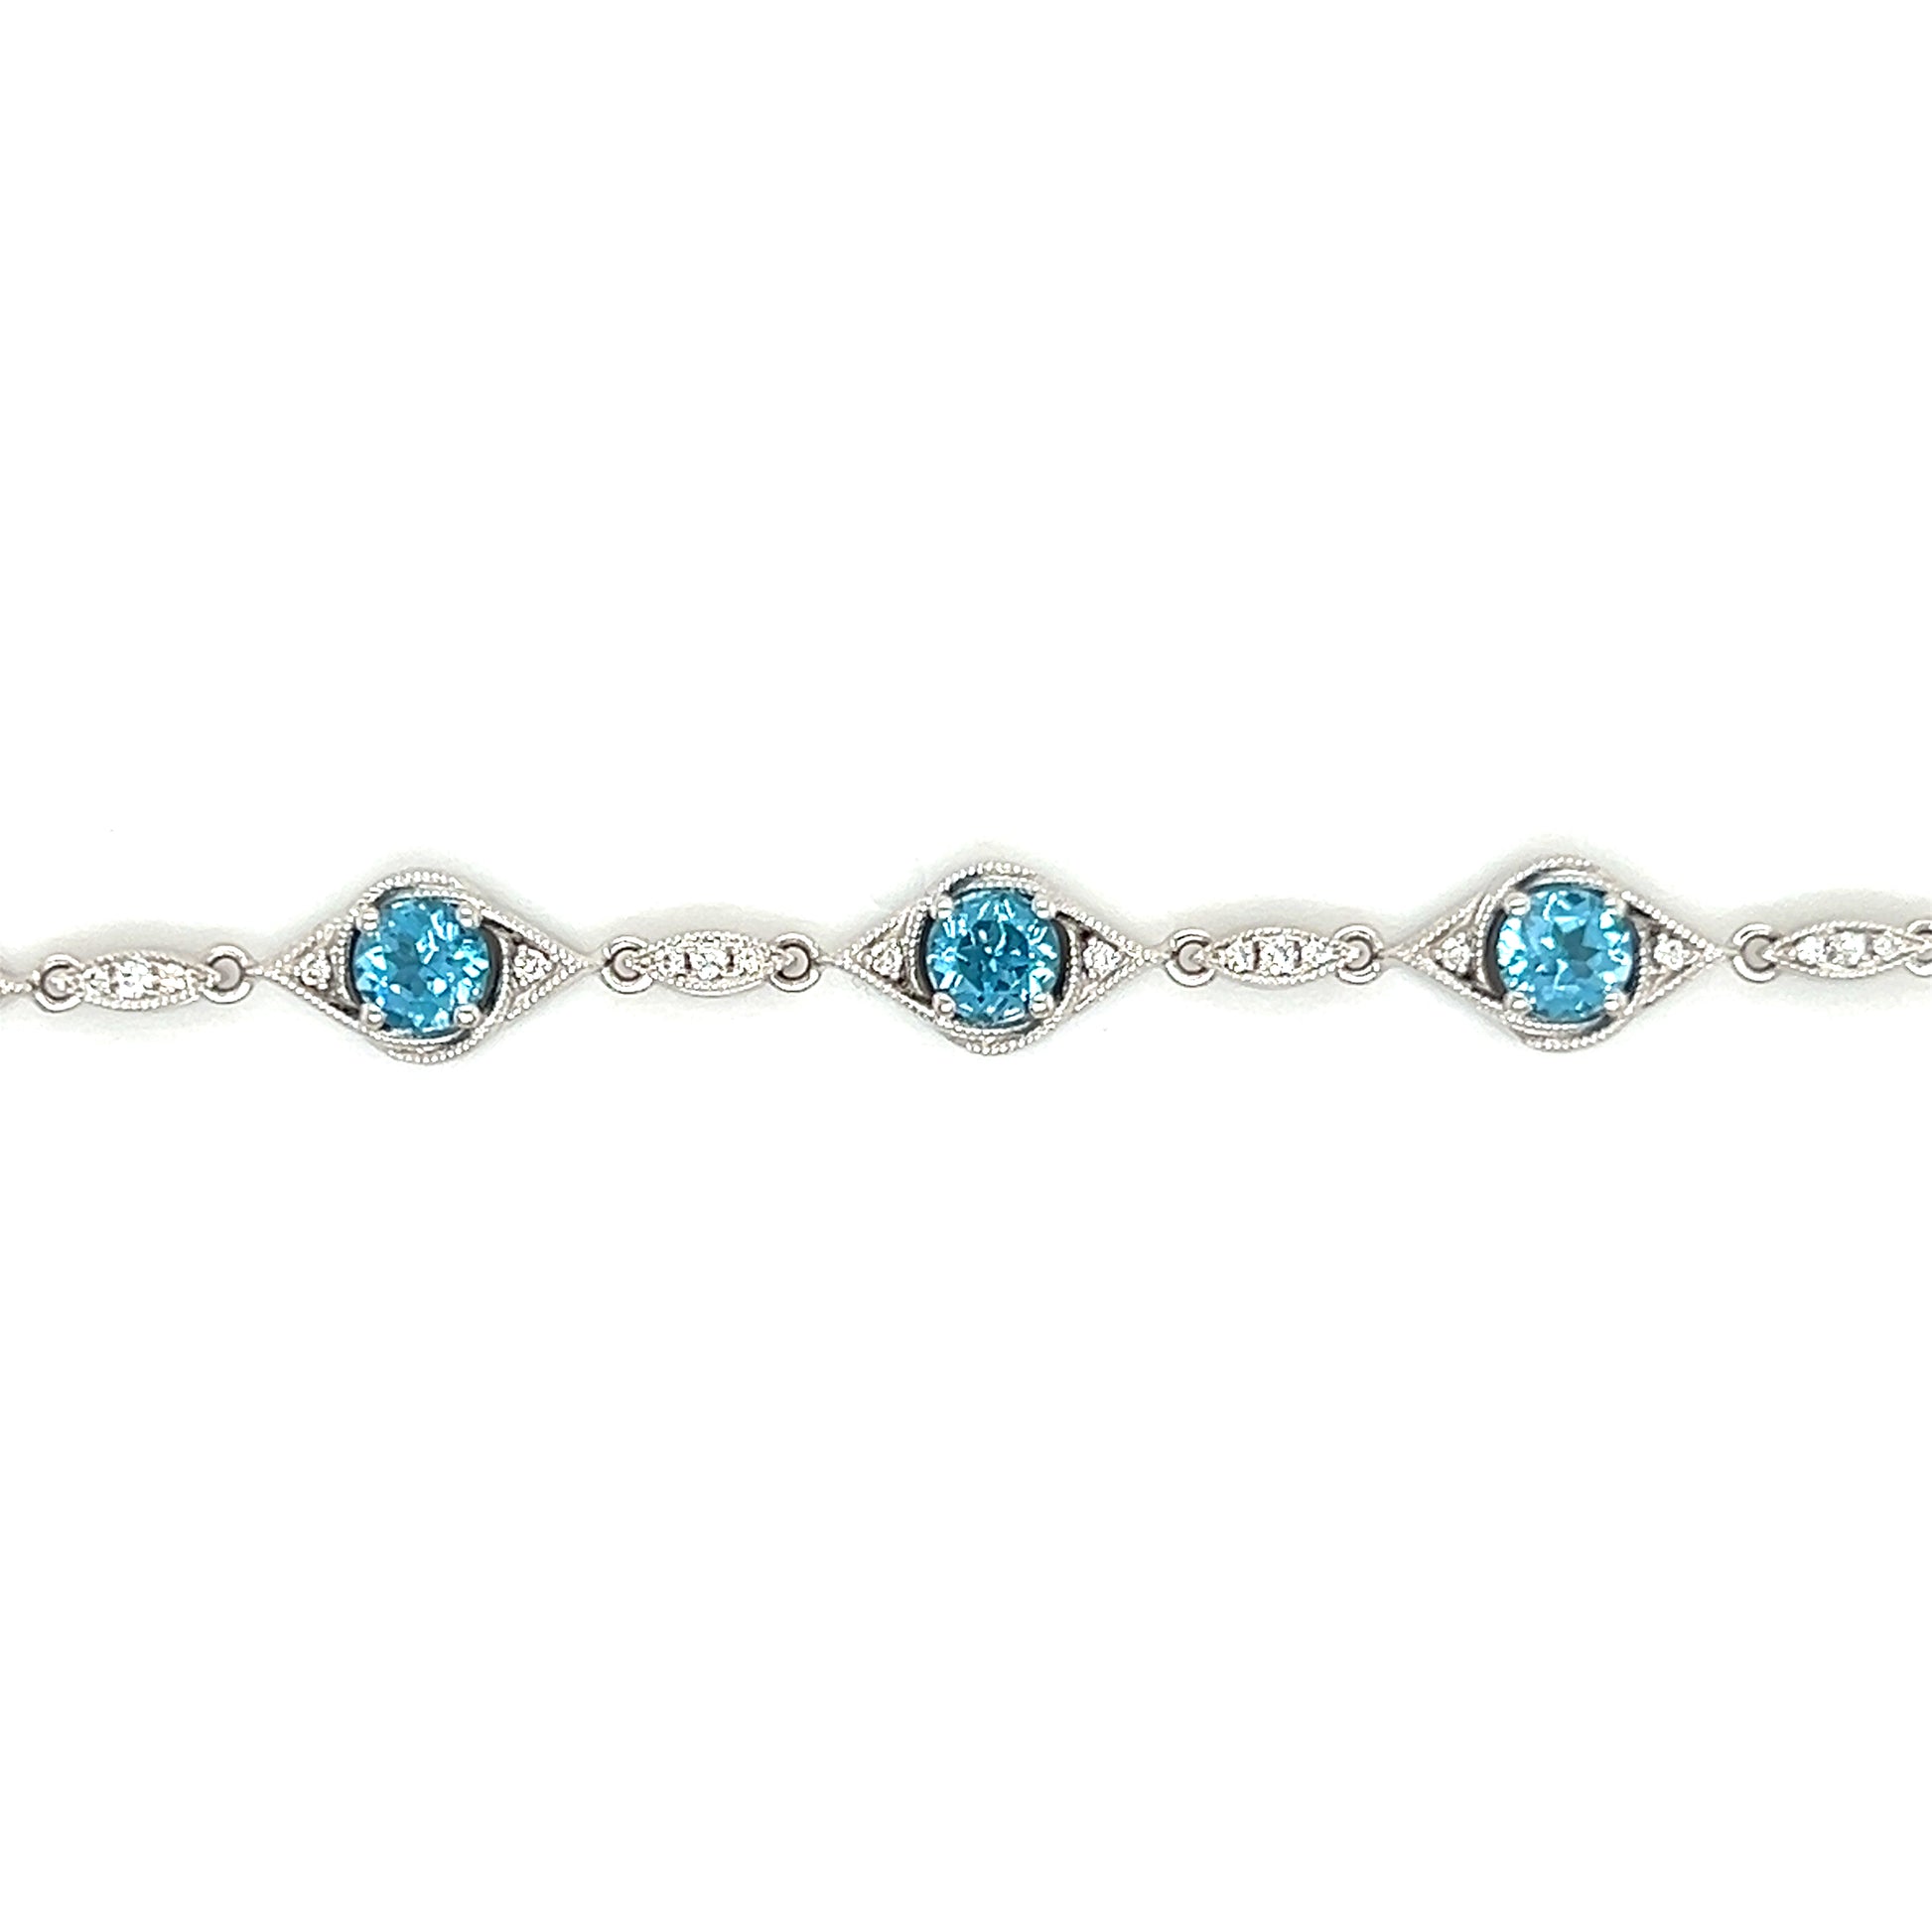 Blue Topaz Link Bracelet with Fifty Diamonds in 14K White Gold Link View